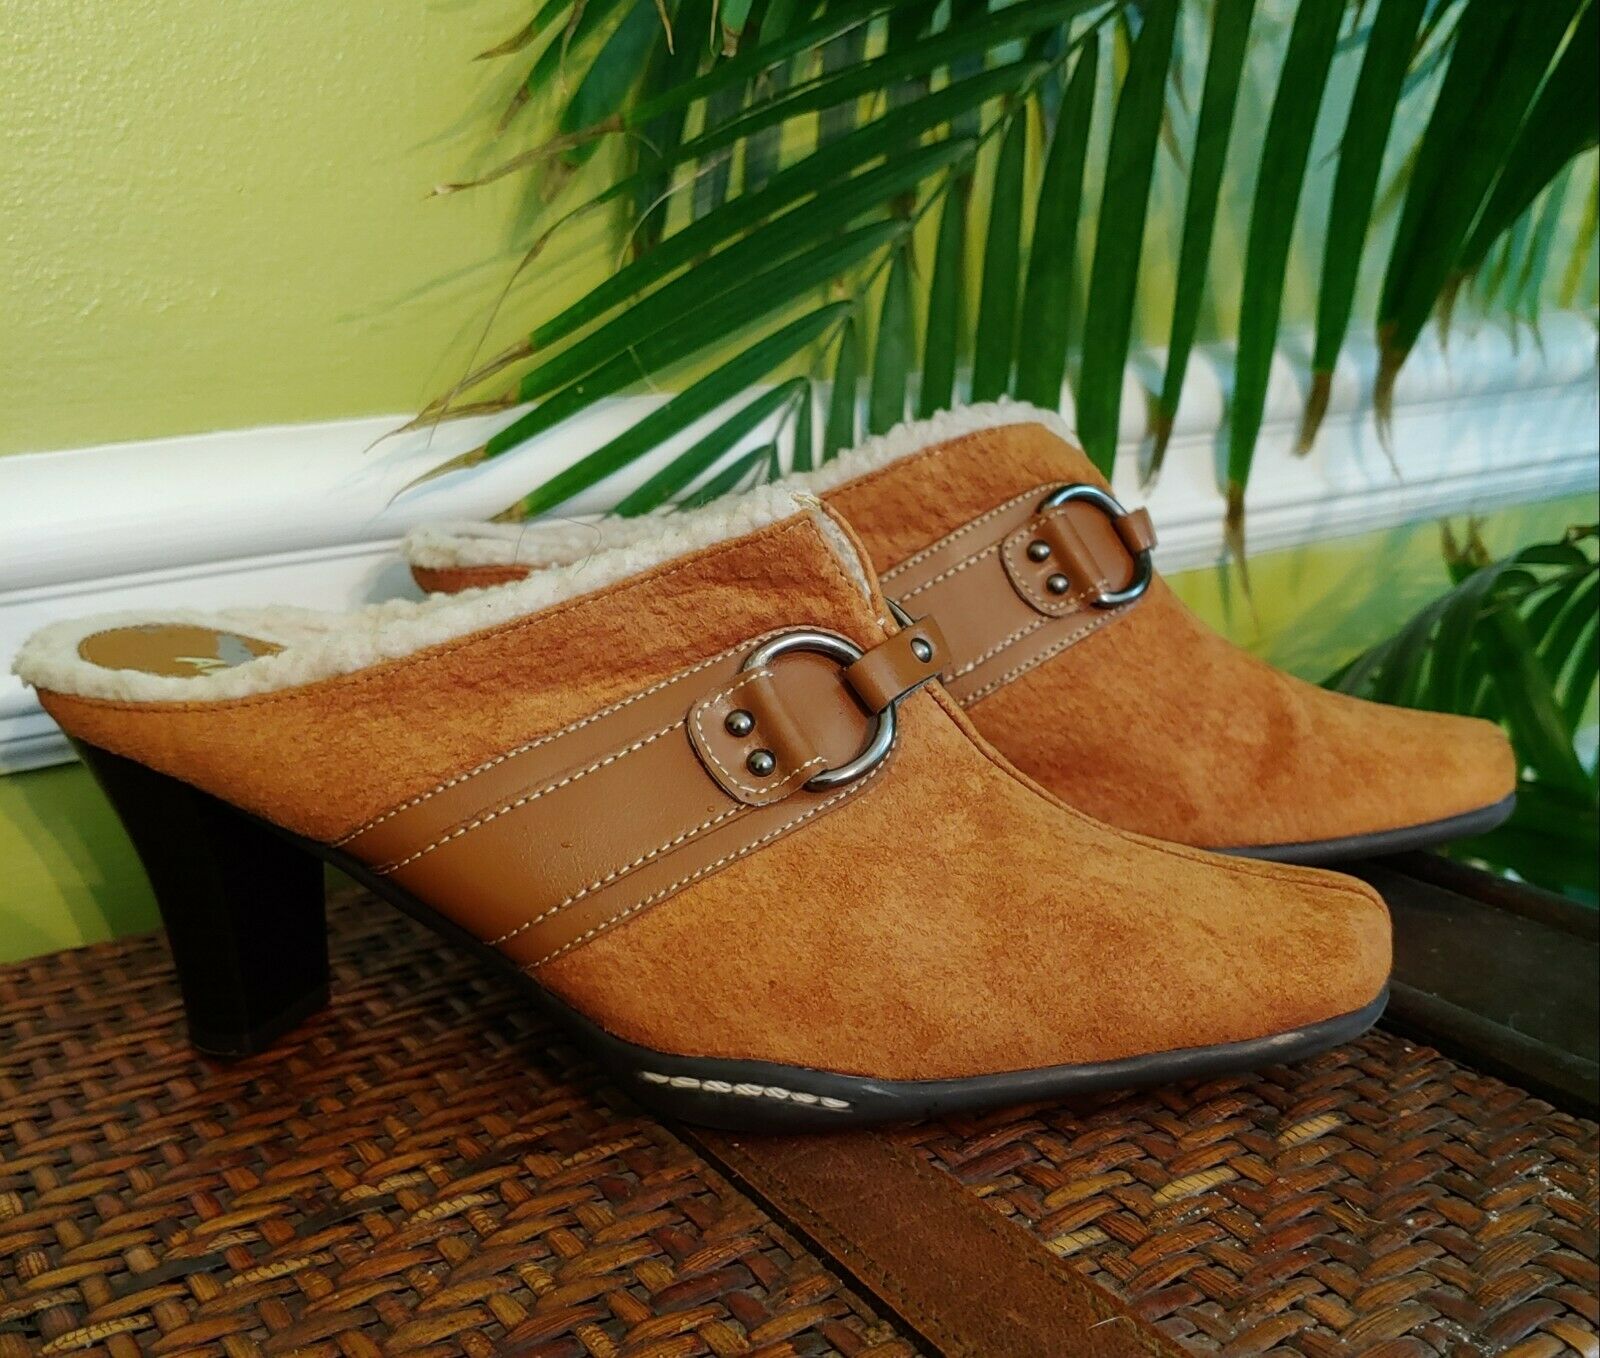 Size: 8B Aerosoles Womens Mules/Clogs, Slip-Ons, Suede Shoes with Sherpa Lining